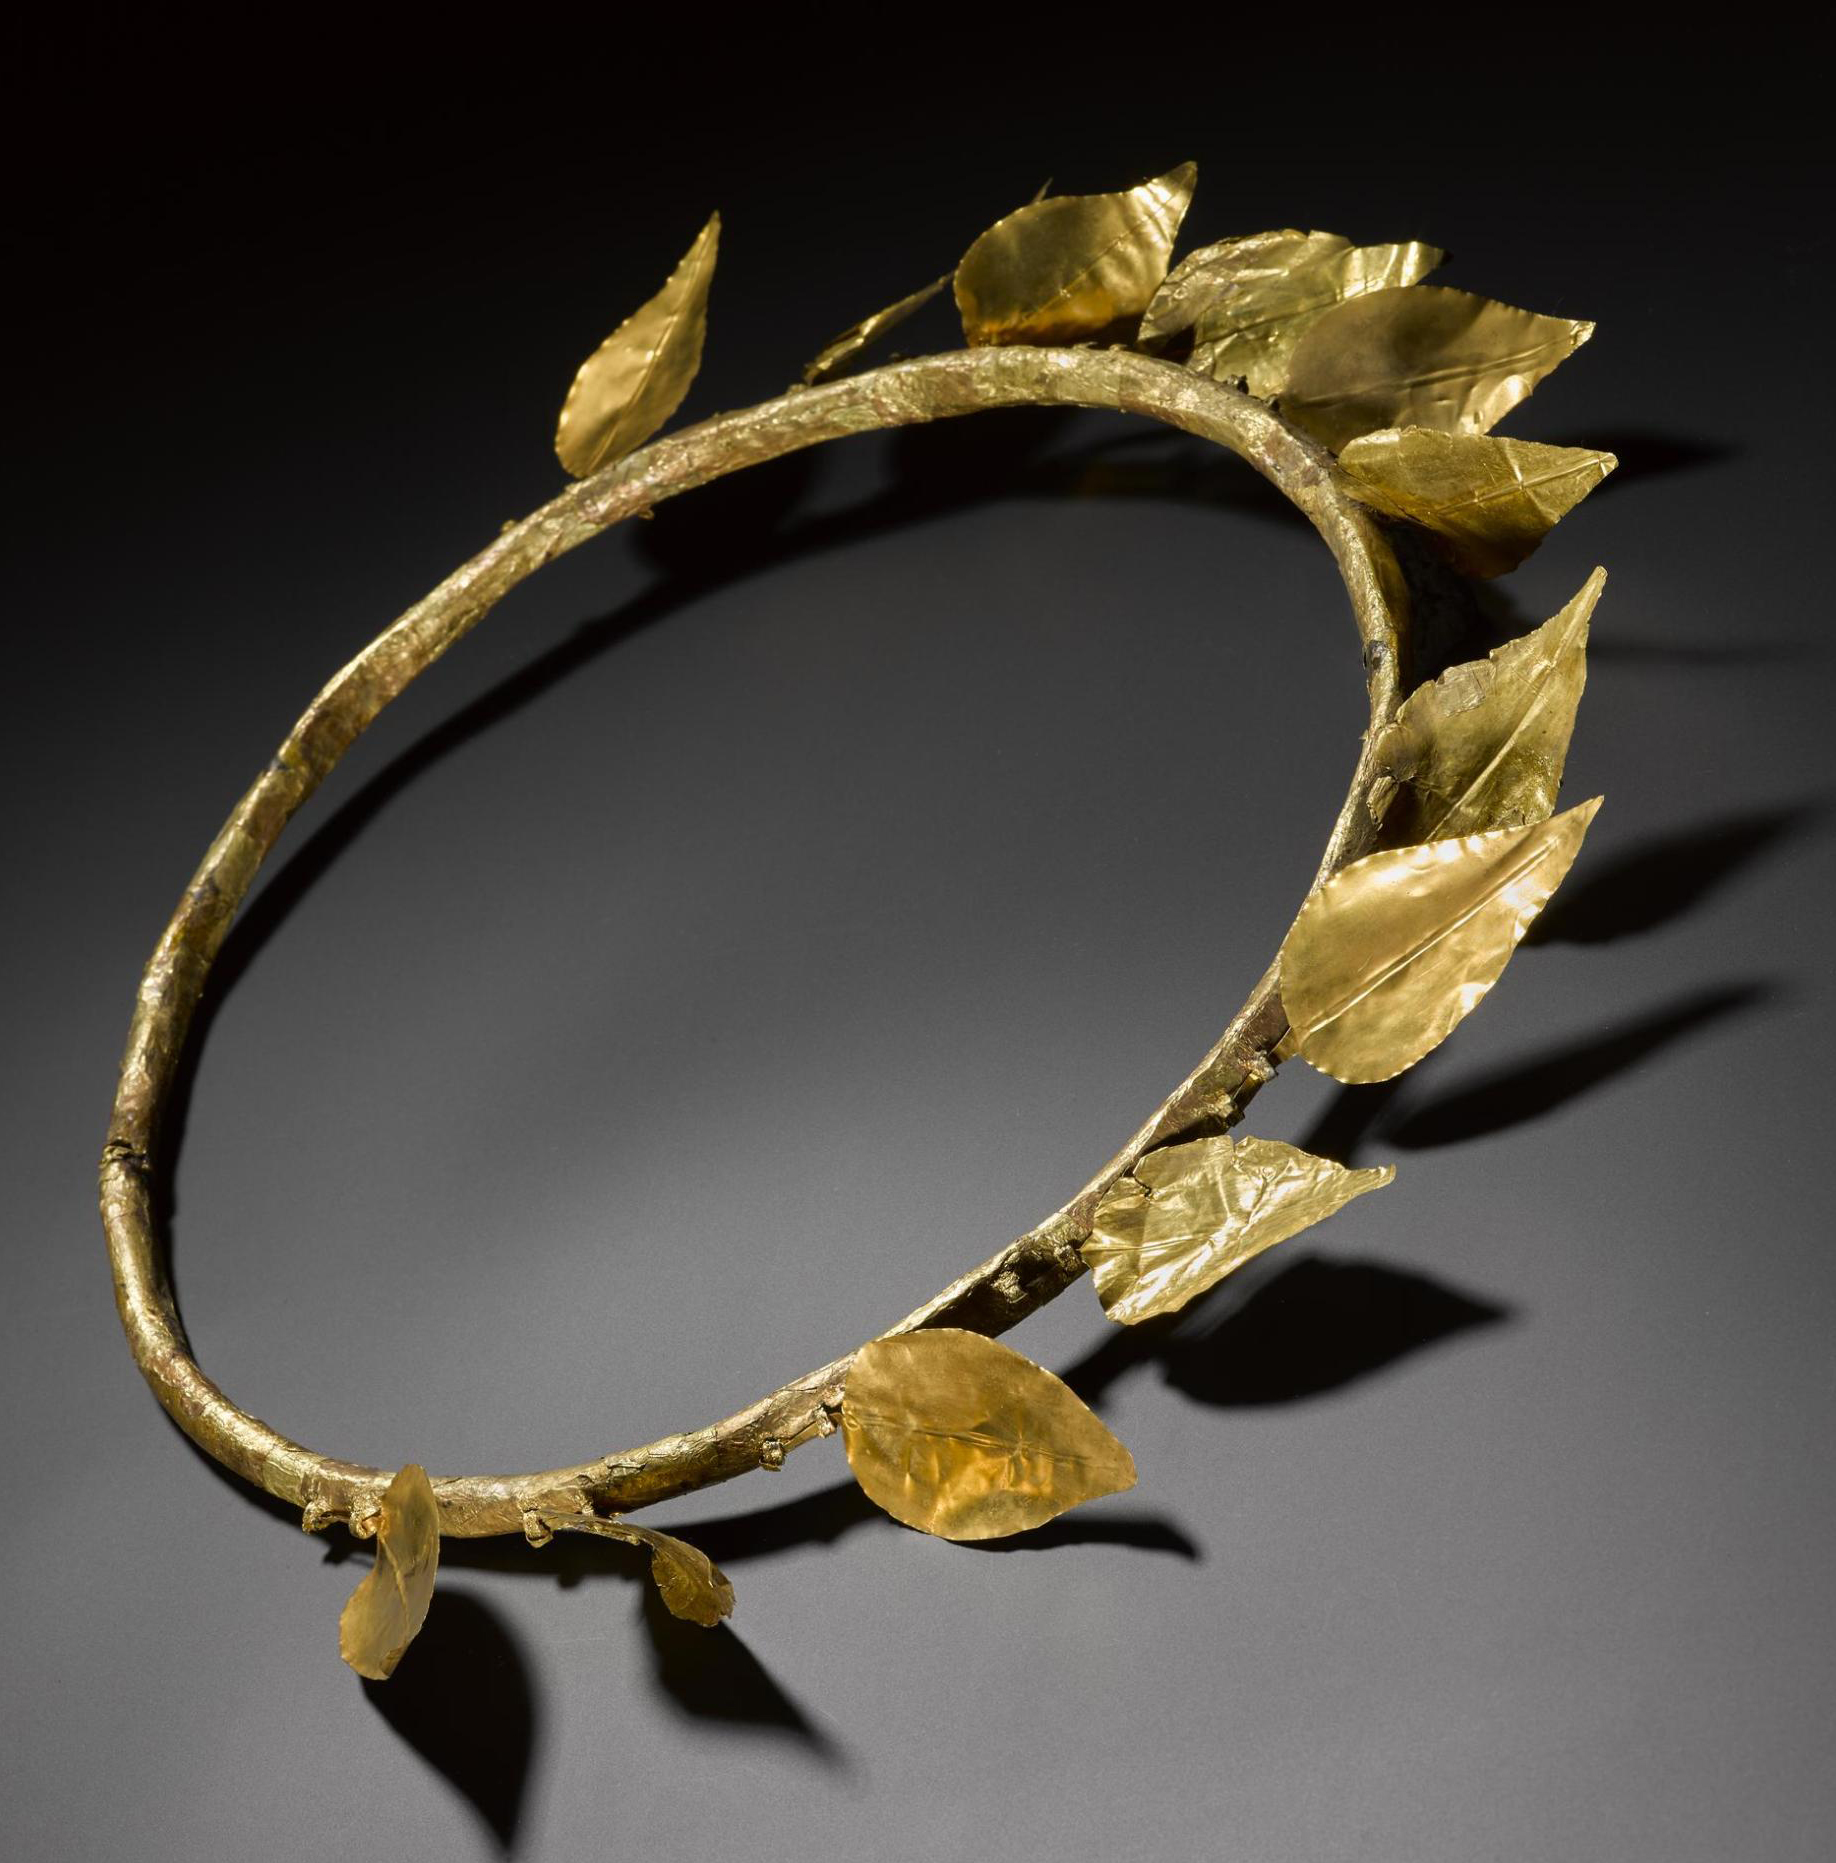 Wreath of twelve gold-foil leaves attached to a ring of copper, found on the mummy of Montsuef: Ancient Egyptian, excavated at Sheikh Abd el-Qurna, Thebes,  c.9BC